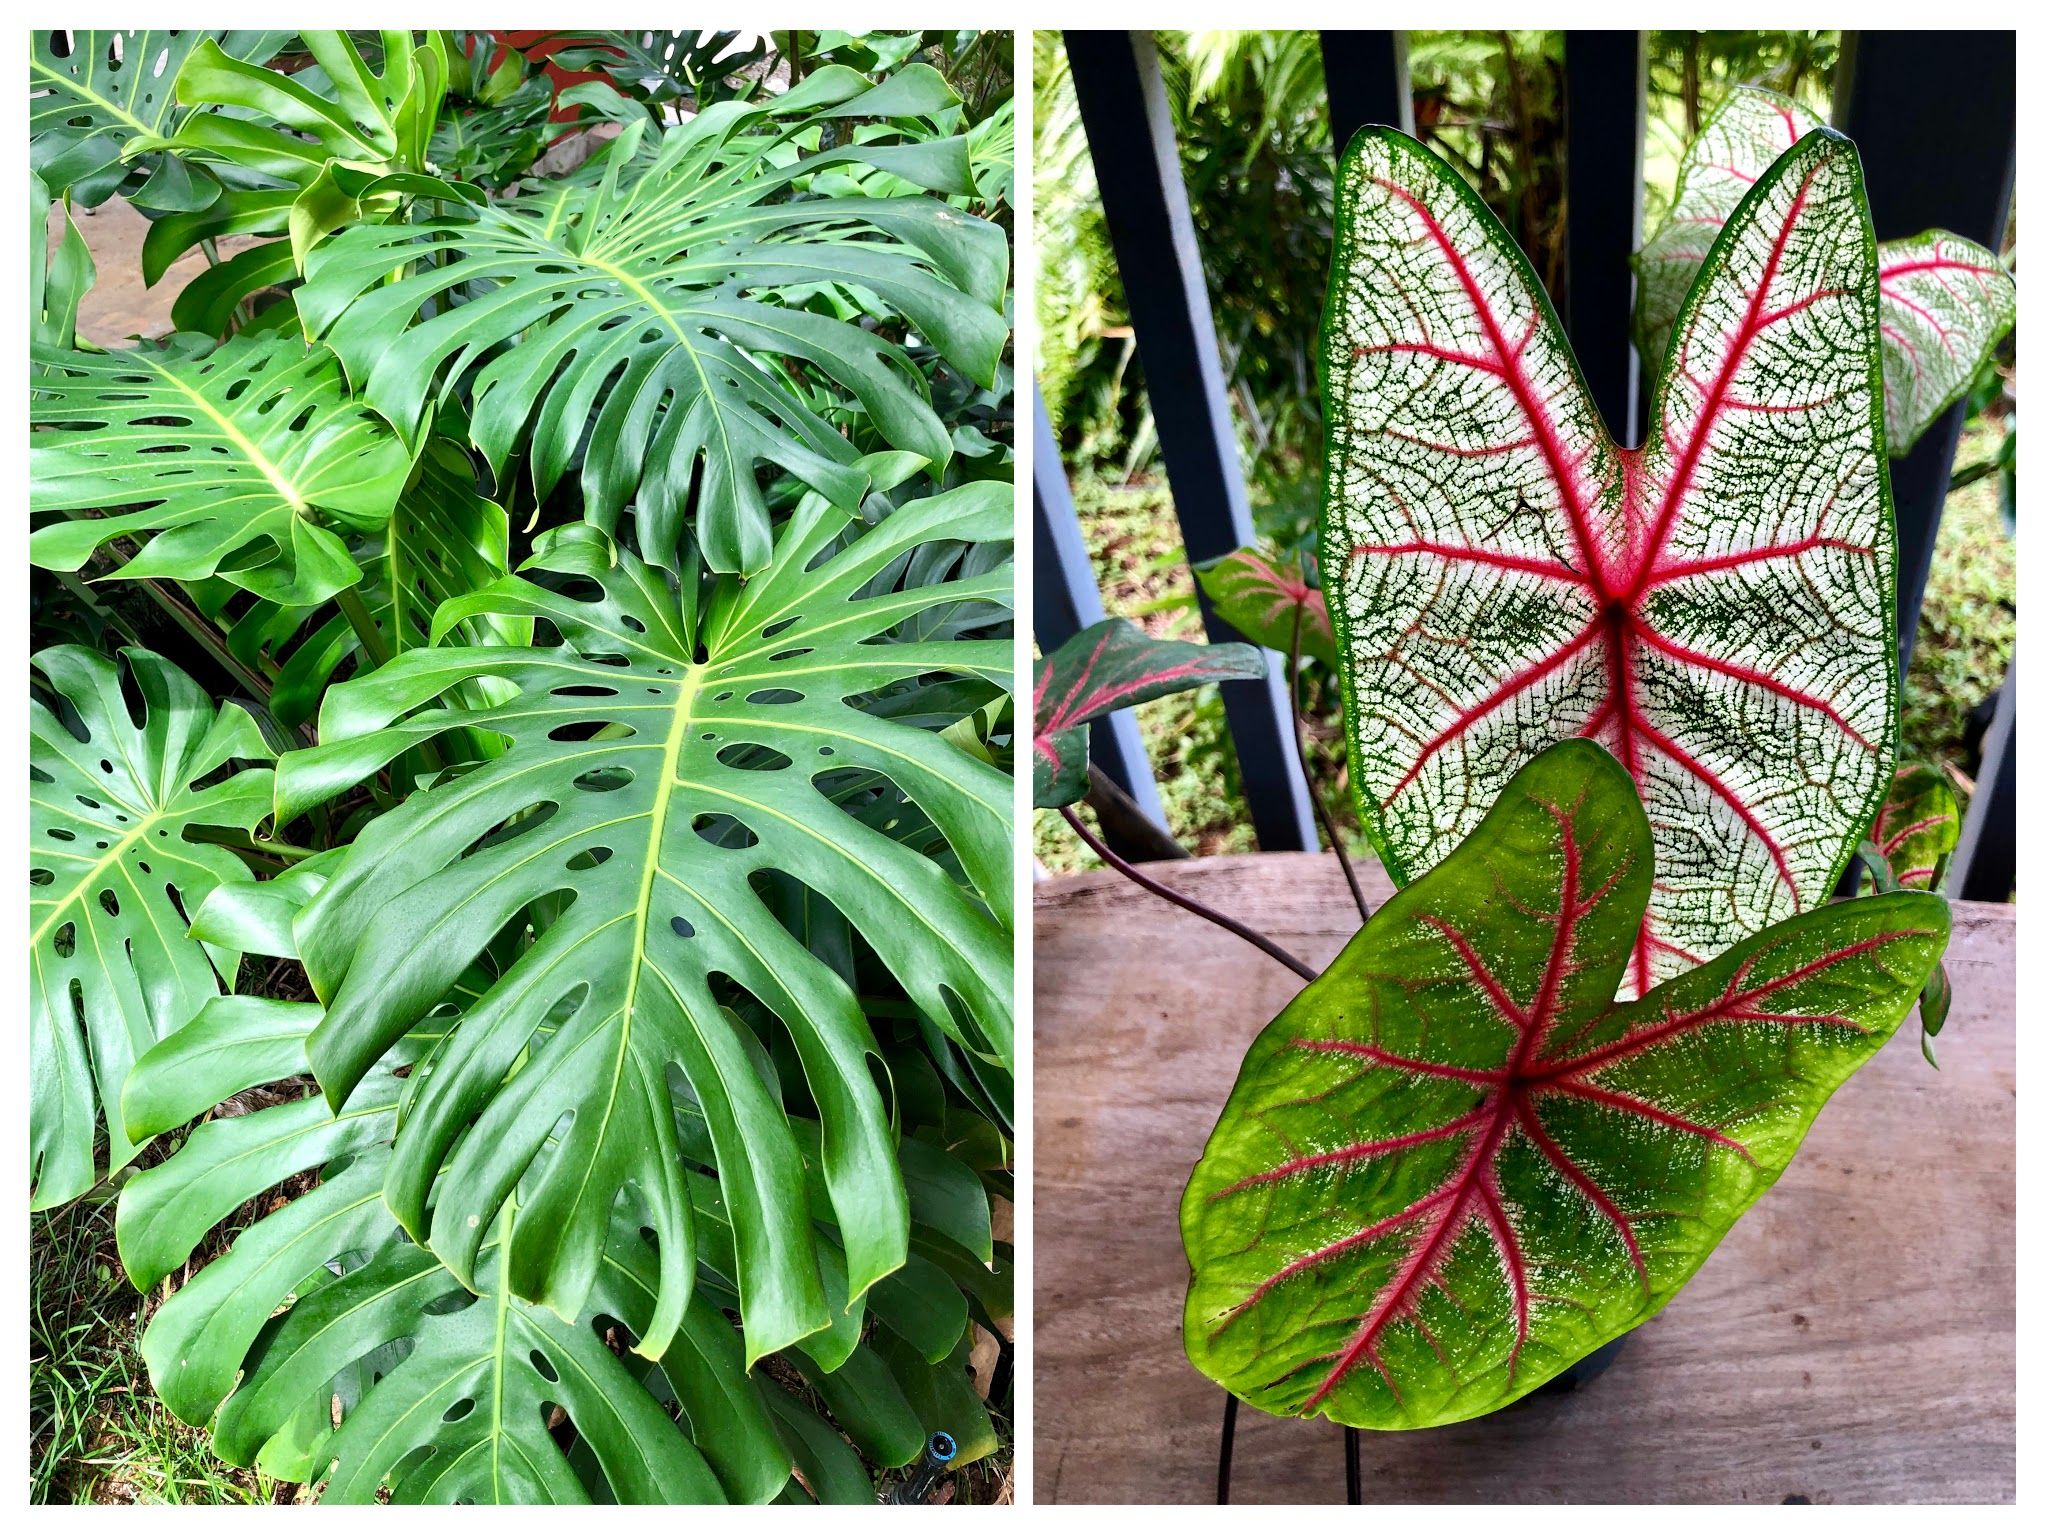 Caption:  Monstera deliciosa - grown for their leaves for interior decor. Caladium (Caladium bicolor) - Elephant Ear plant. On the mainland this is considered an indoor houseplant. But in Hawaii, it is easily grown outdoors for their interesting color leaves. Photos: @karenvchin